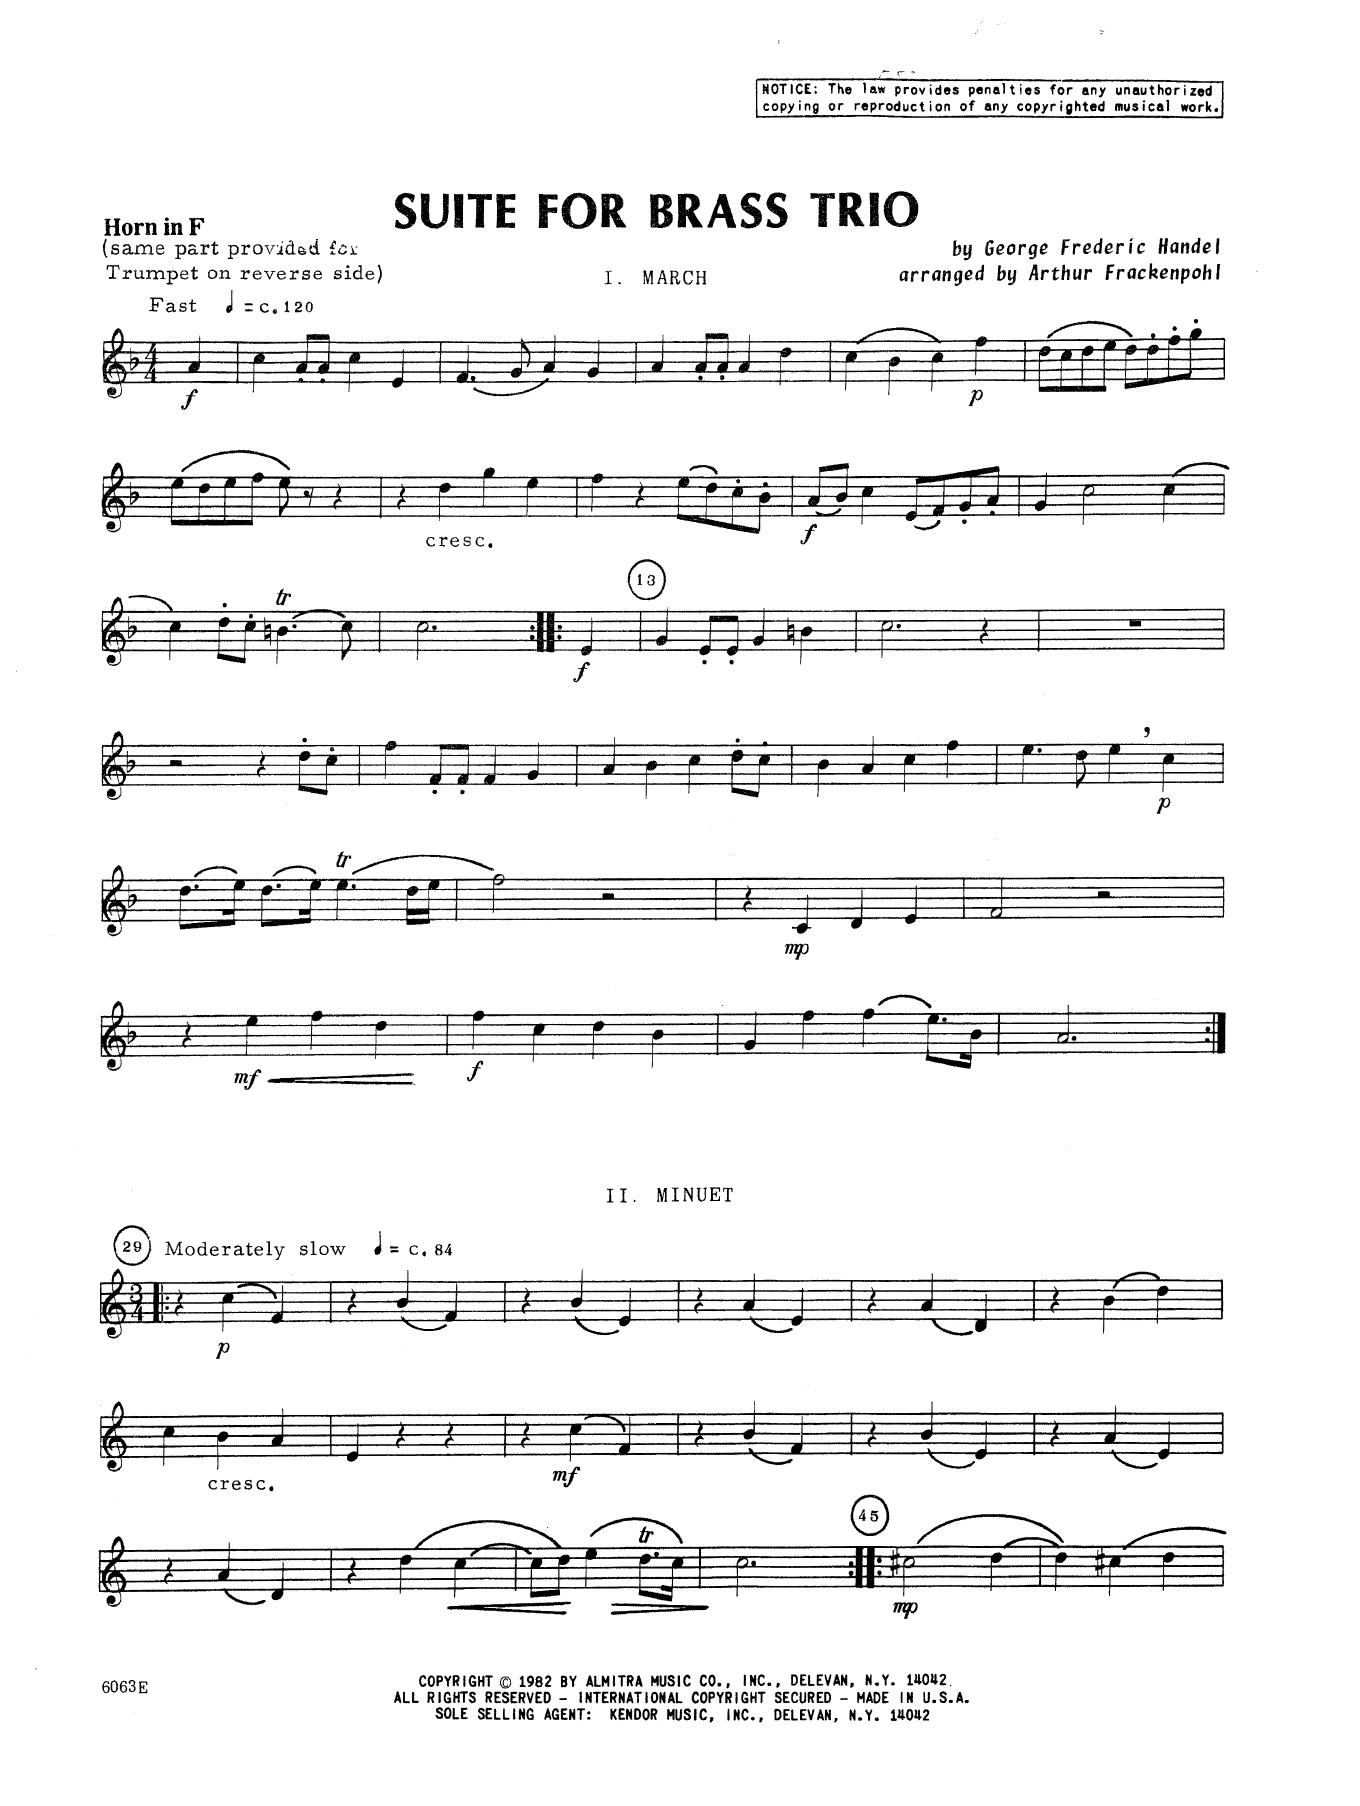 Download Frackenpohl Suite For Brass Trio - Horn in F Sheet Music